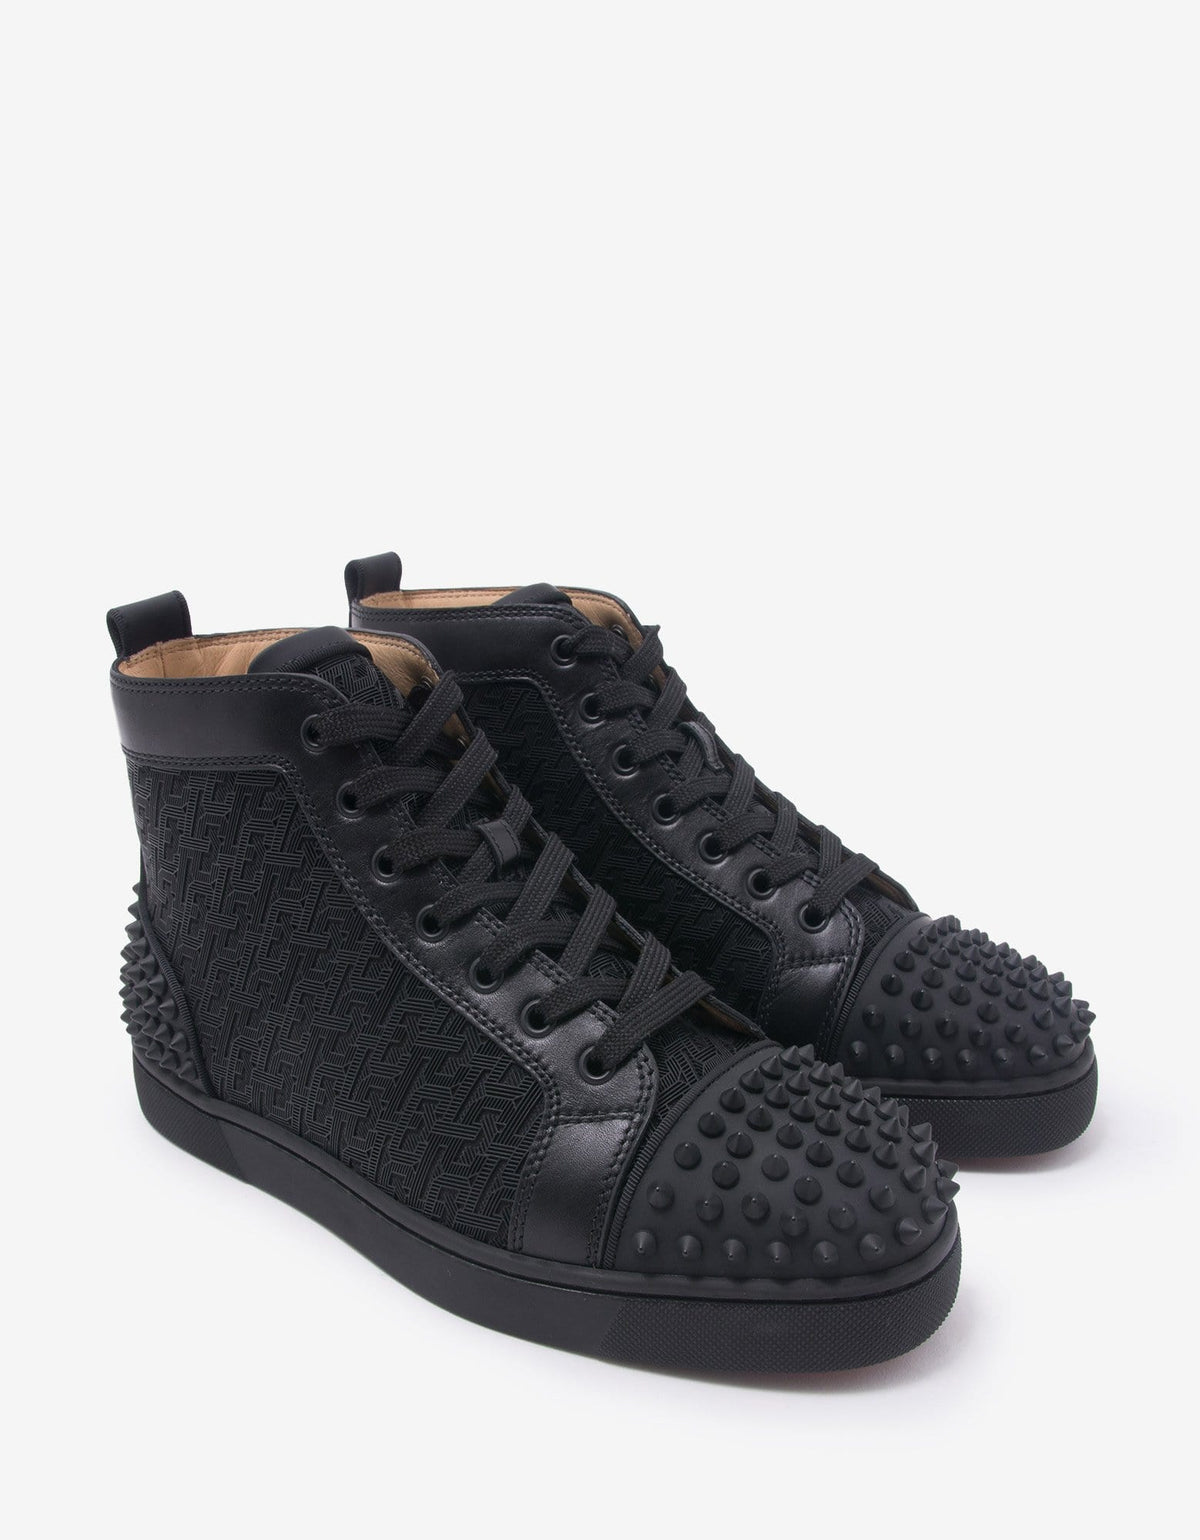 Christian Louboutin Lou Spikes 2 Black CL Logo High Top Trainers -